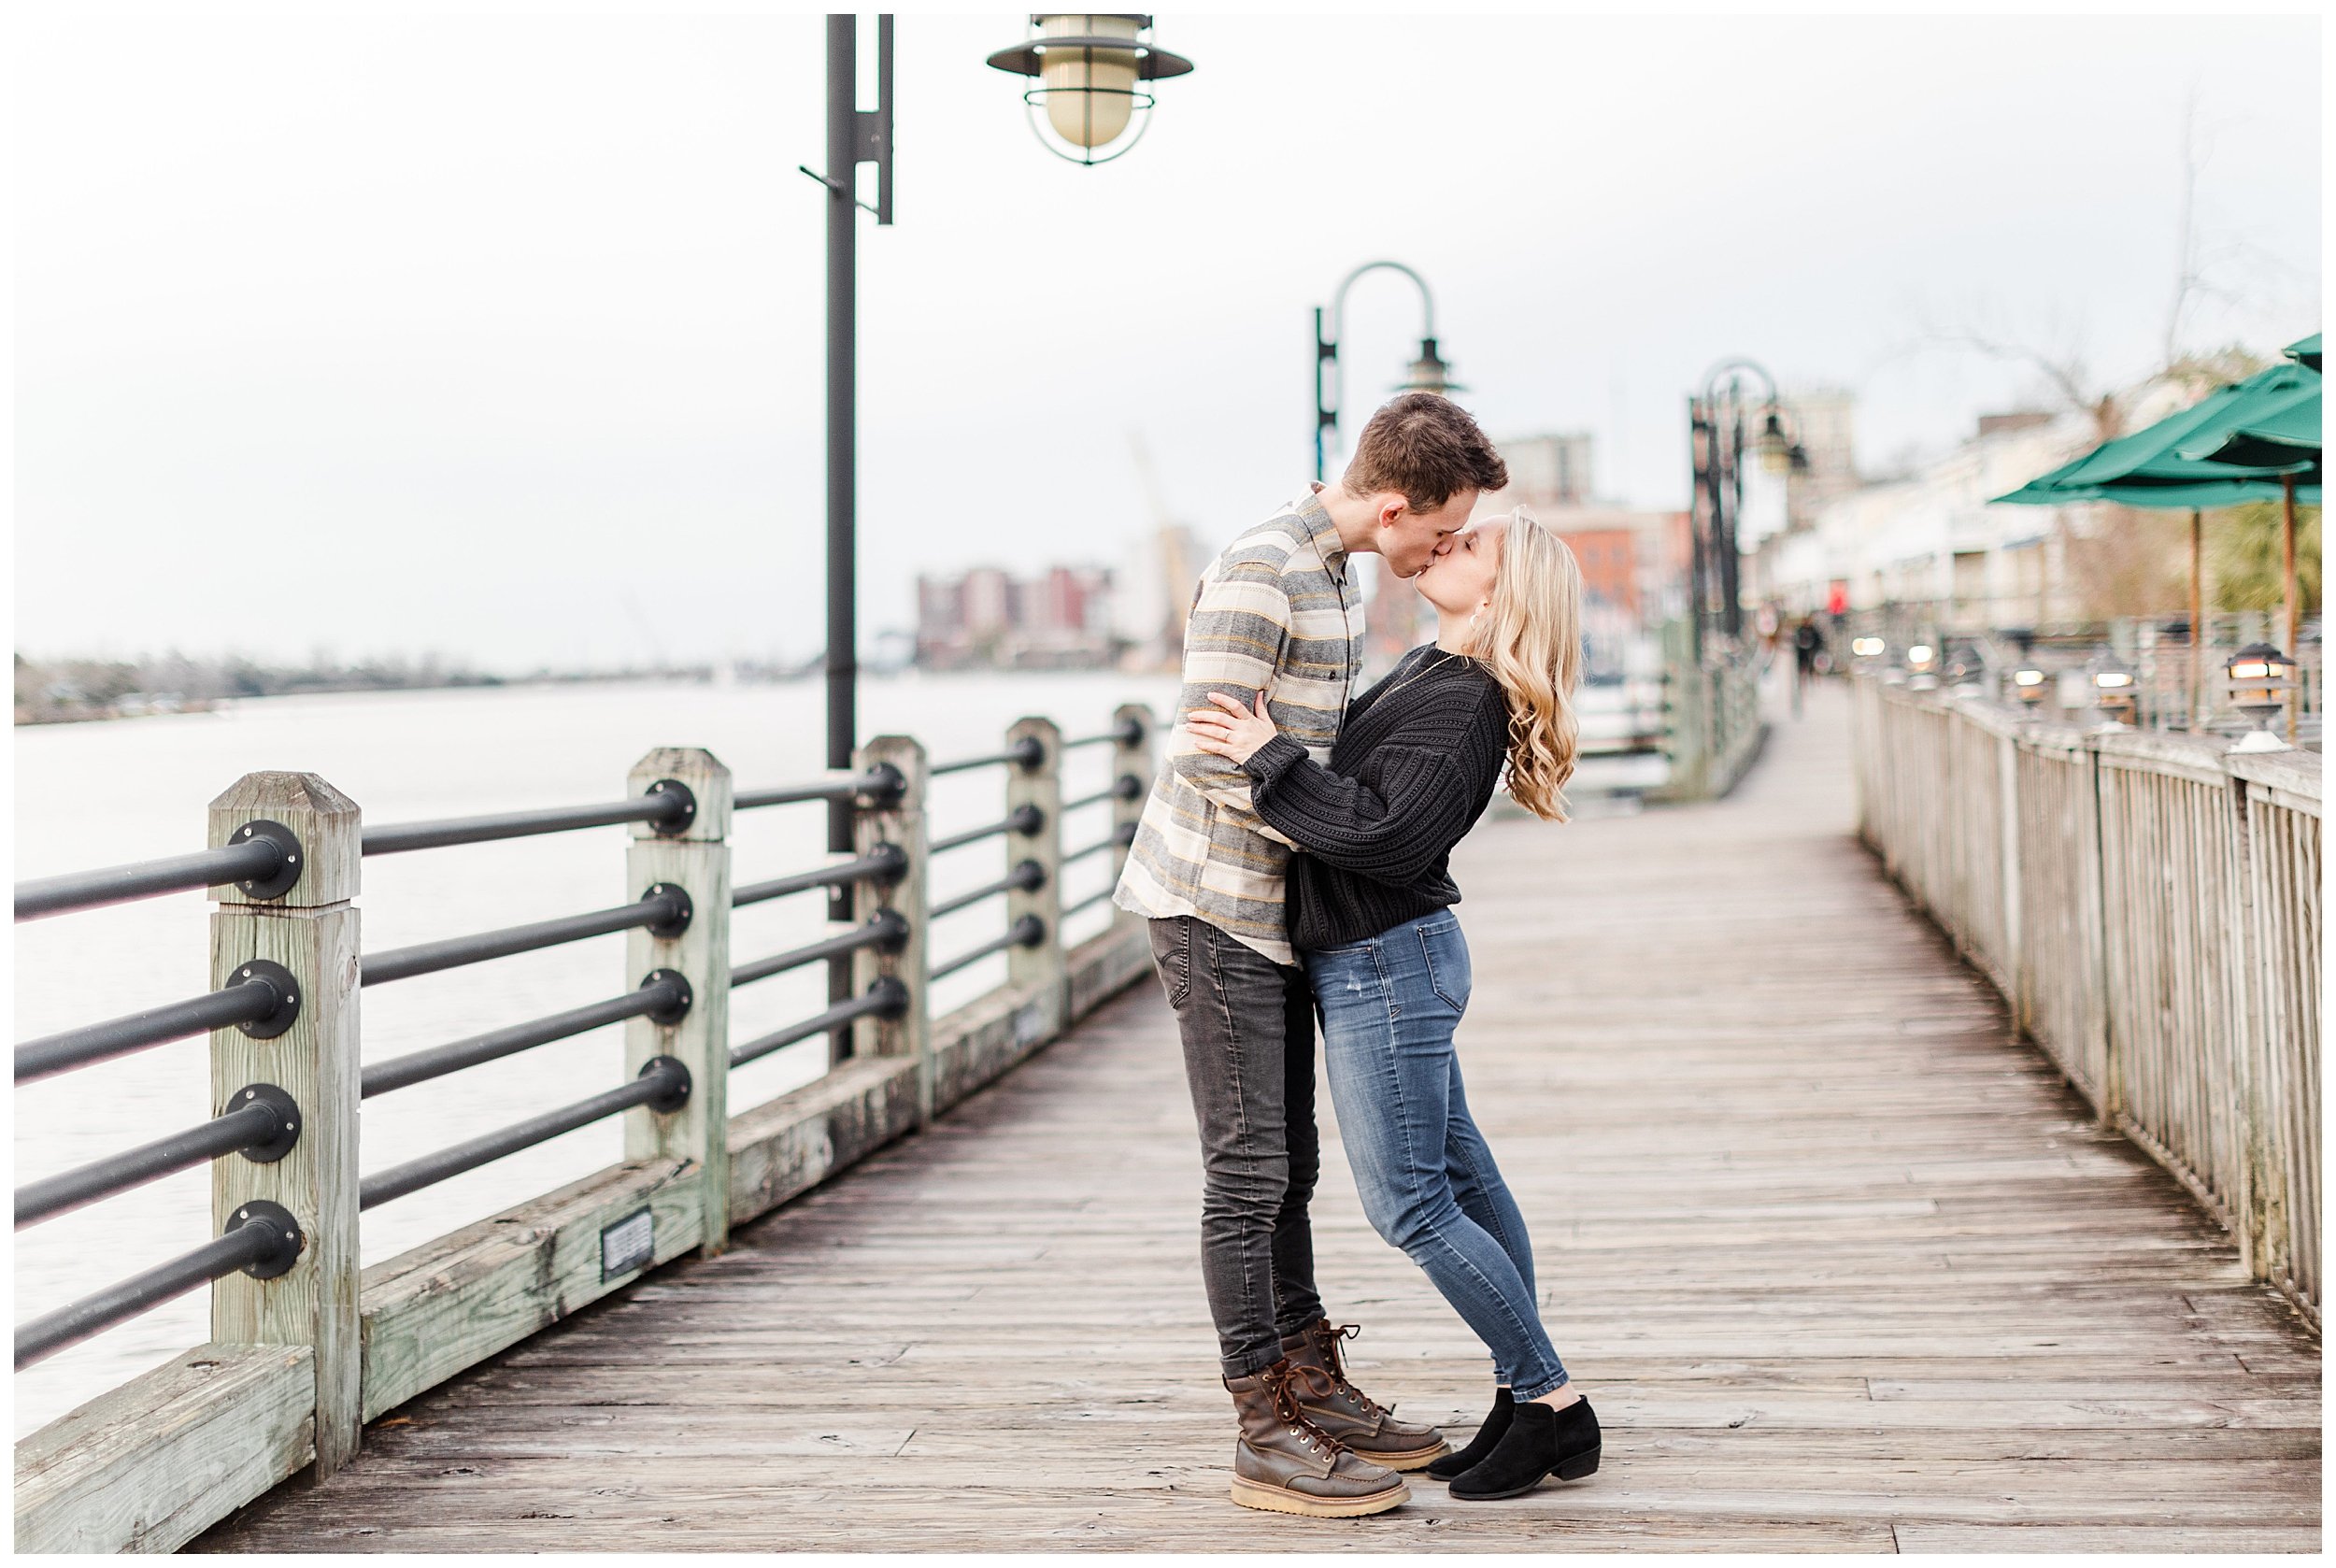 wilmington riverwalk and historic district engagement session ashley christ photography wilmington wedding photographer_0072.jpg